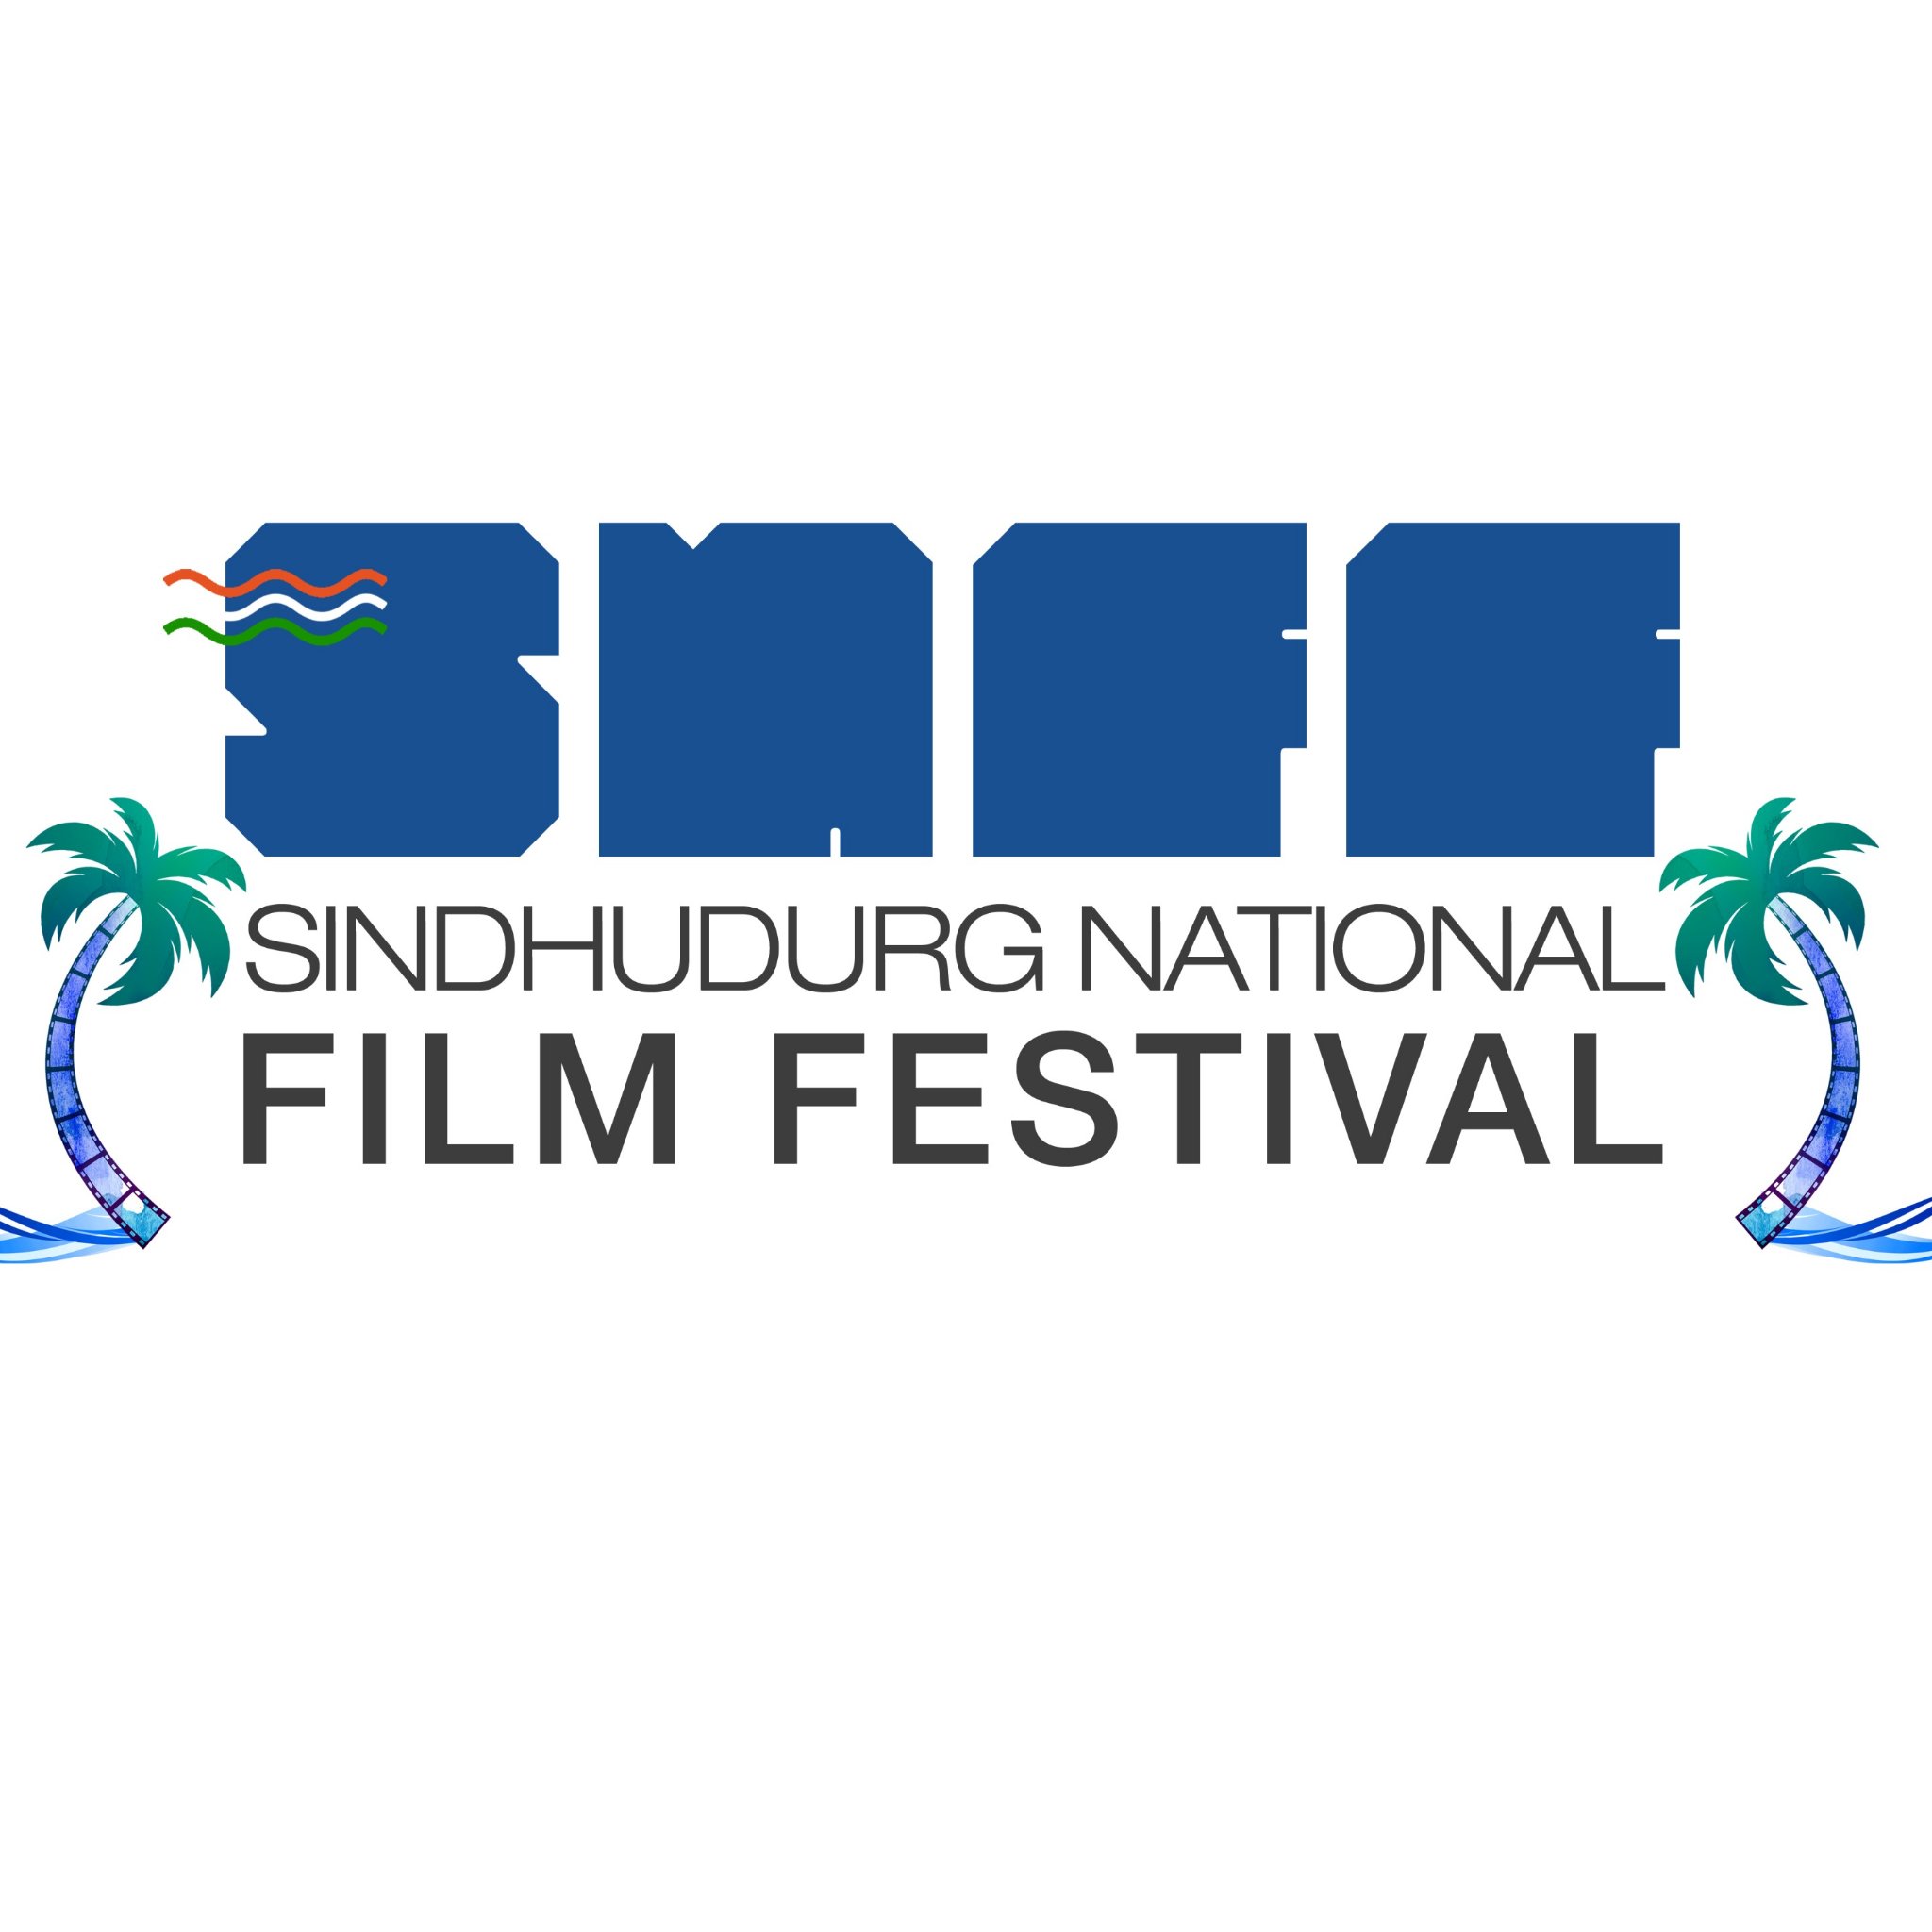 We have organized A short film festival named #SNFF at devgad,Sindhudurg from 3rd to 6th february,2019.
Send your shortfilms till 20 jan on snfilmfest@gmail.com